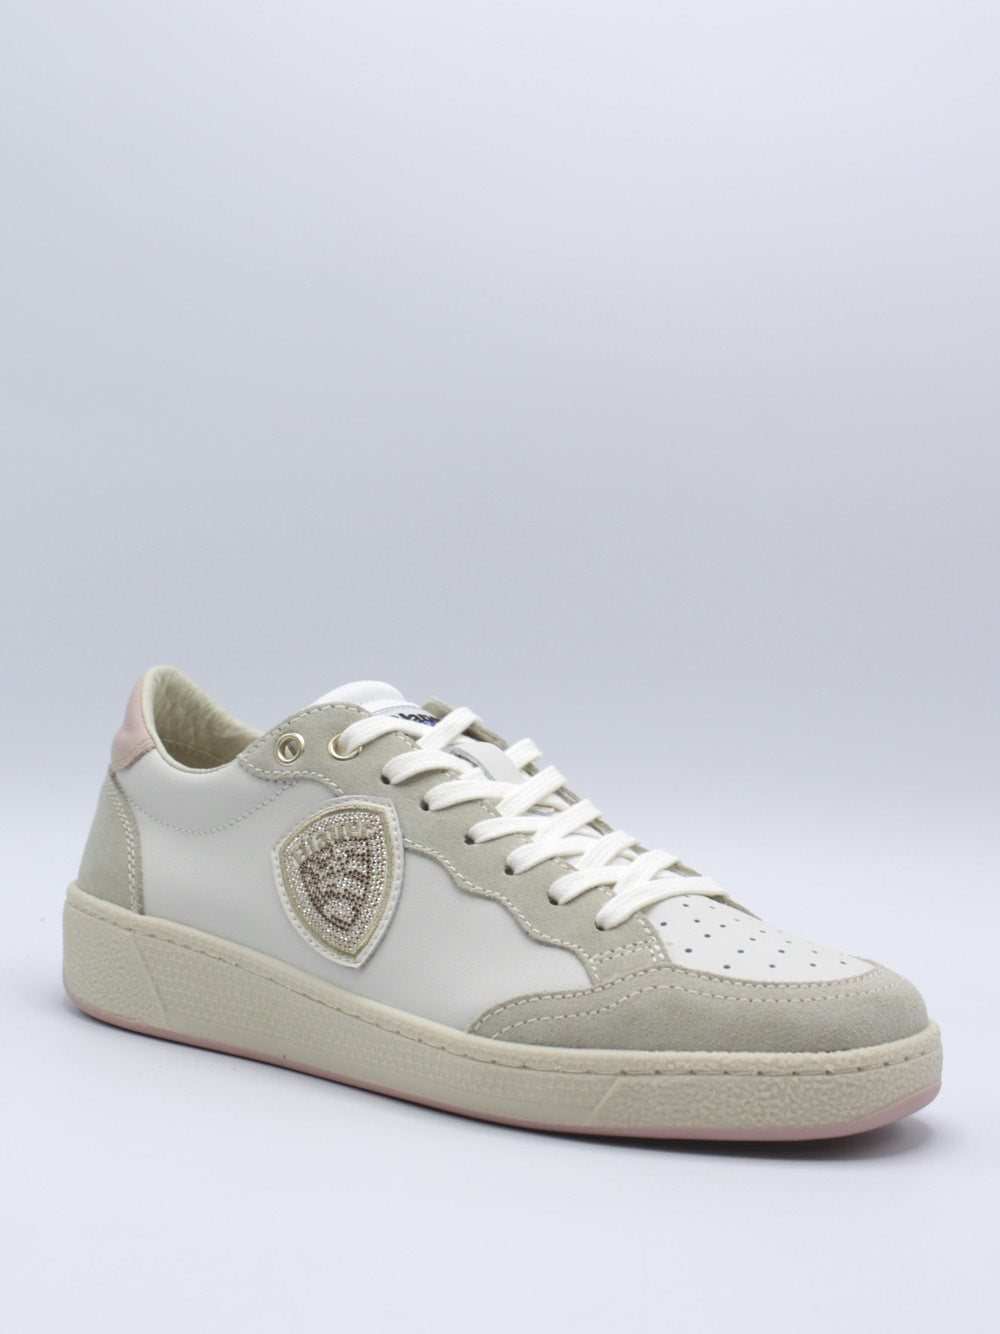 BLAUER Sneakers Donna - Bianco